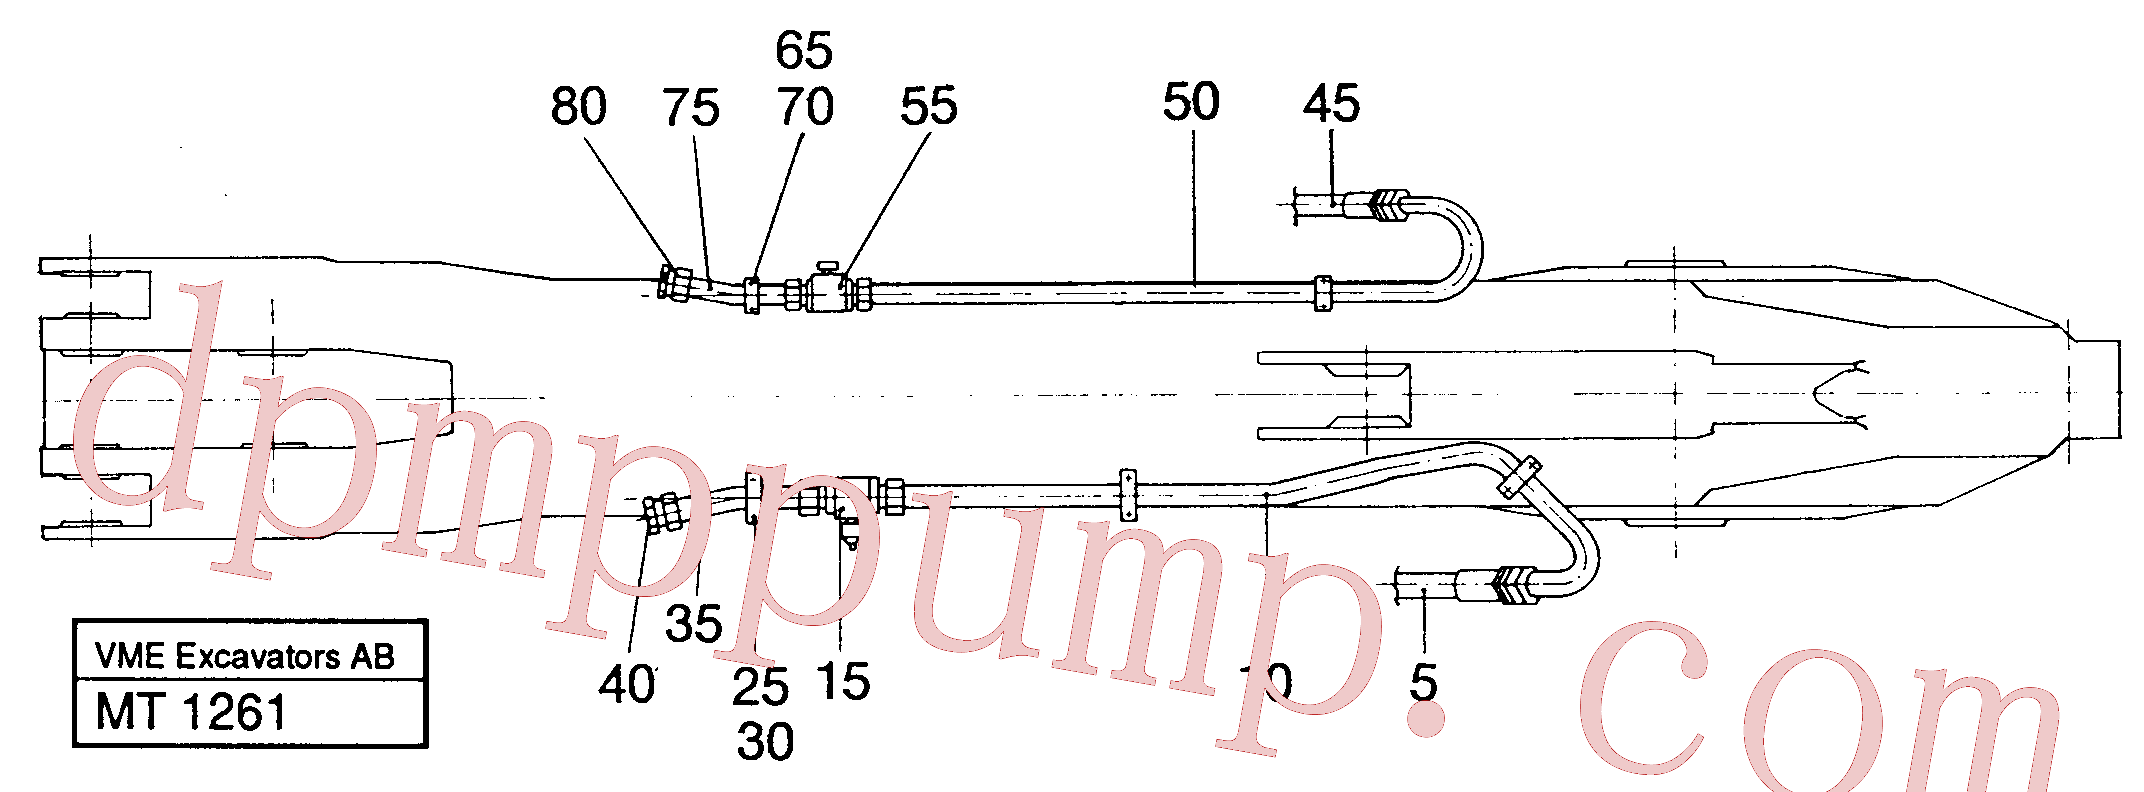 VOE14247149 for Volvo Hydraulic hammer equipment on dipper with shut-off cocks(MT1261 assembly)